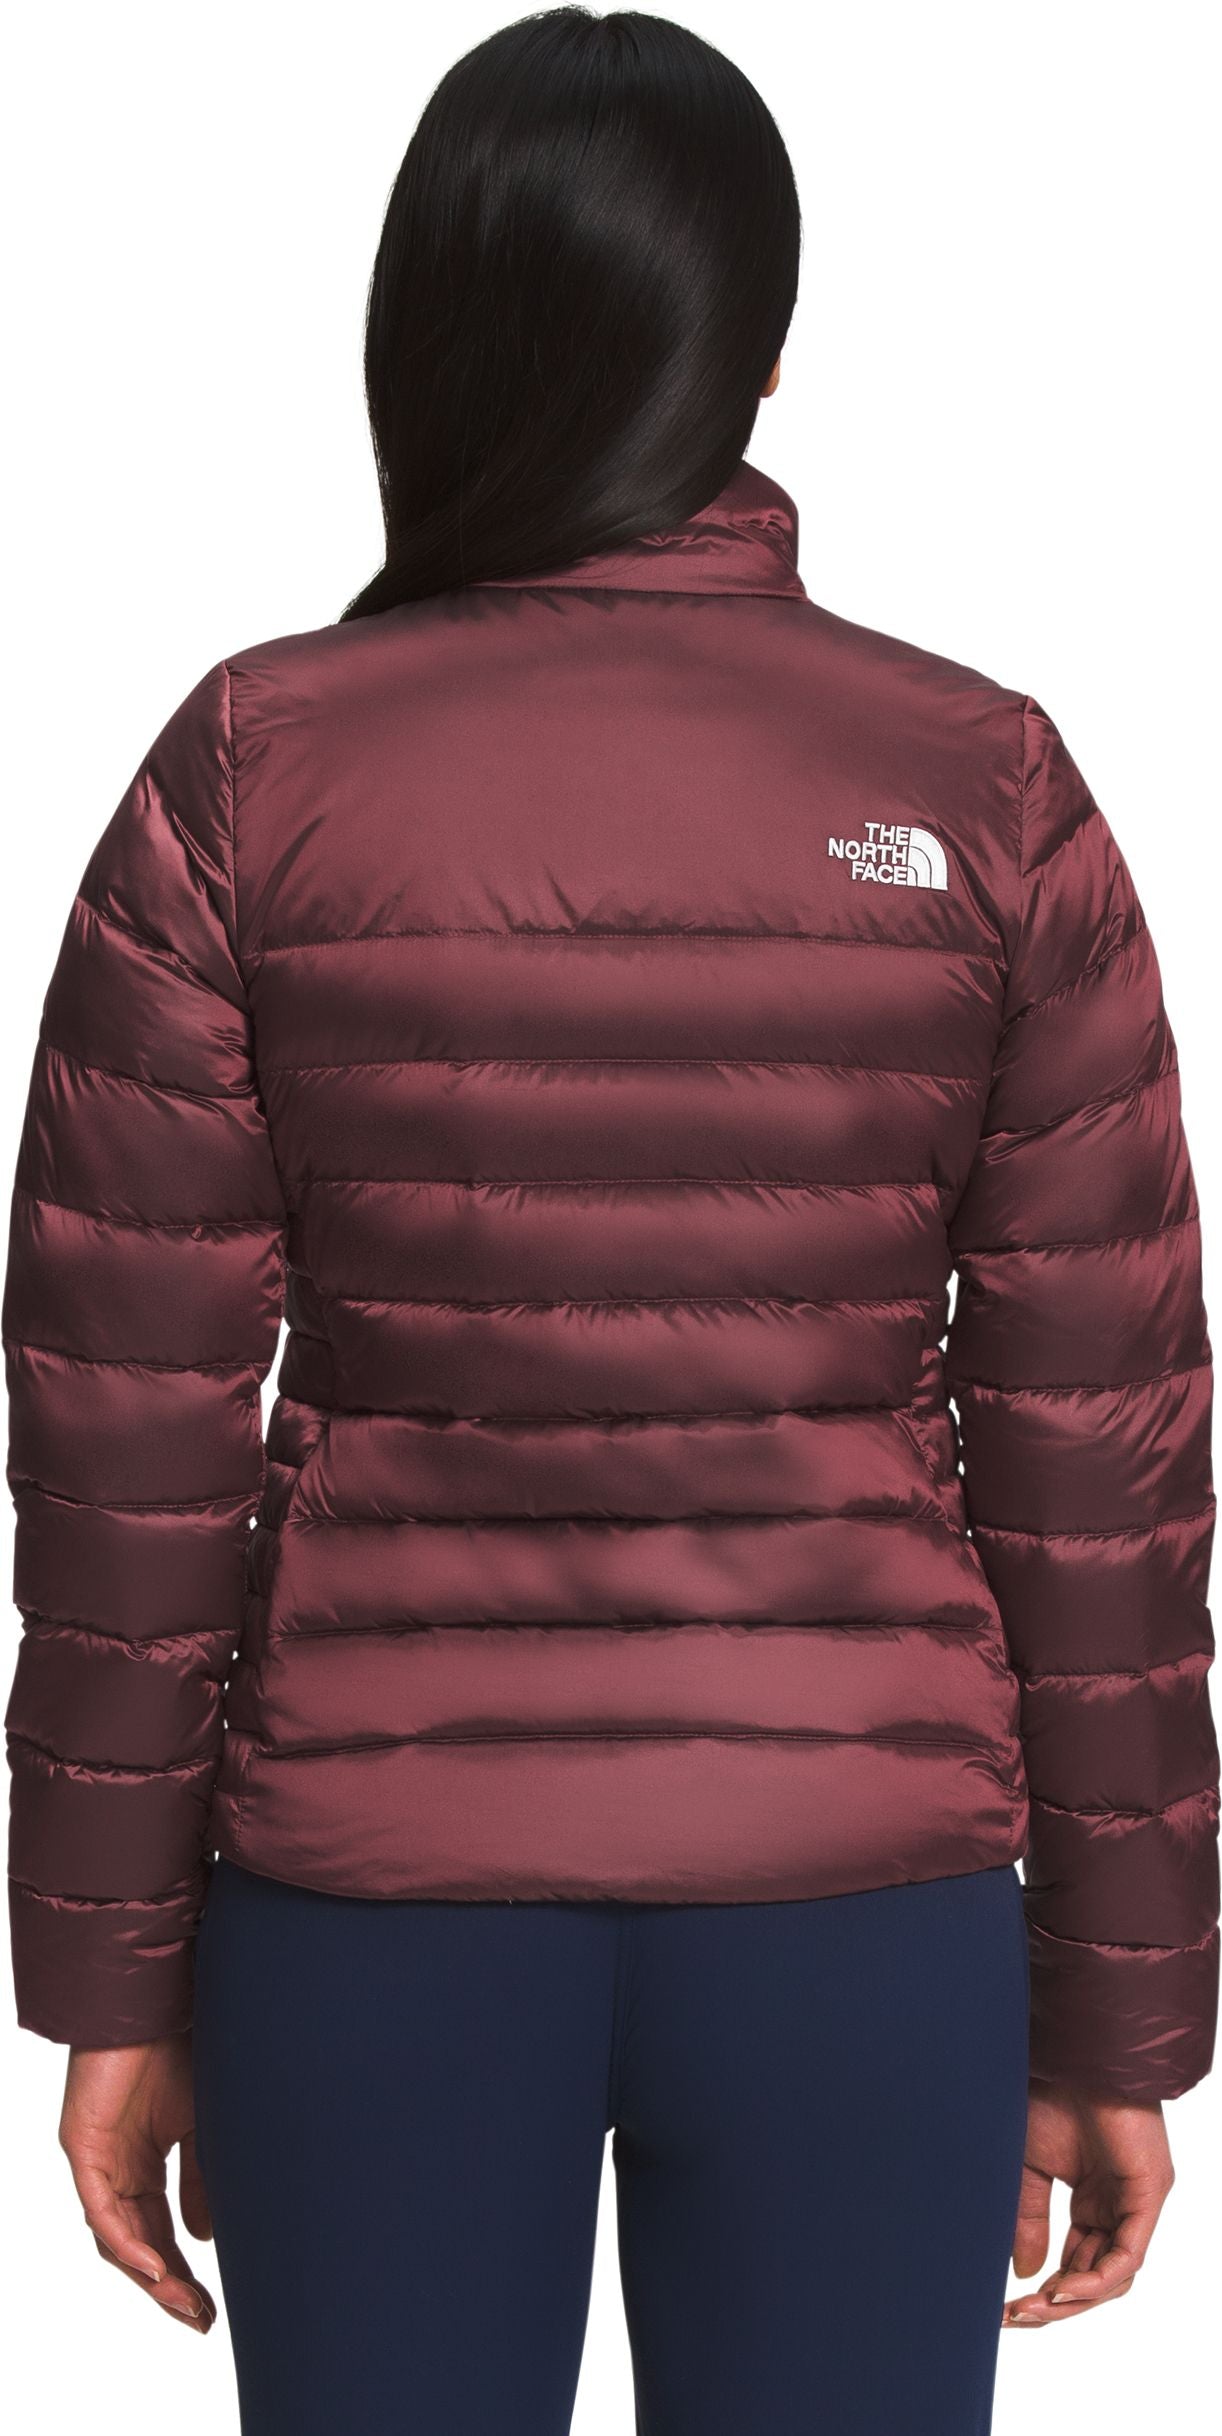 The North Face Apparel Women's Aconcagua Jacket Wild Ginger